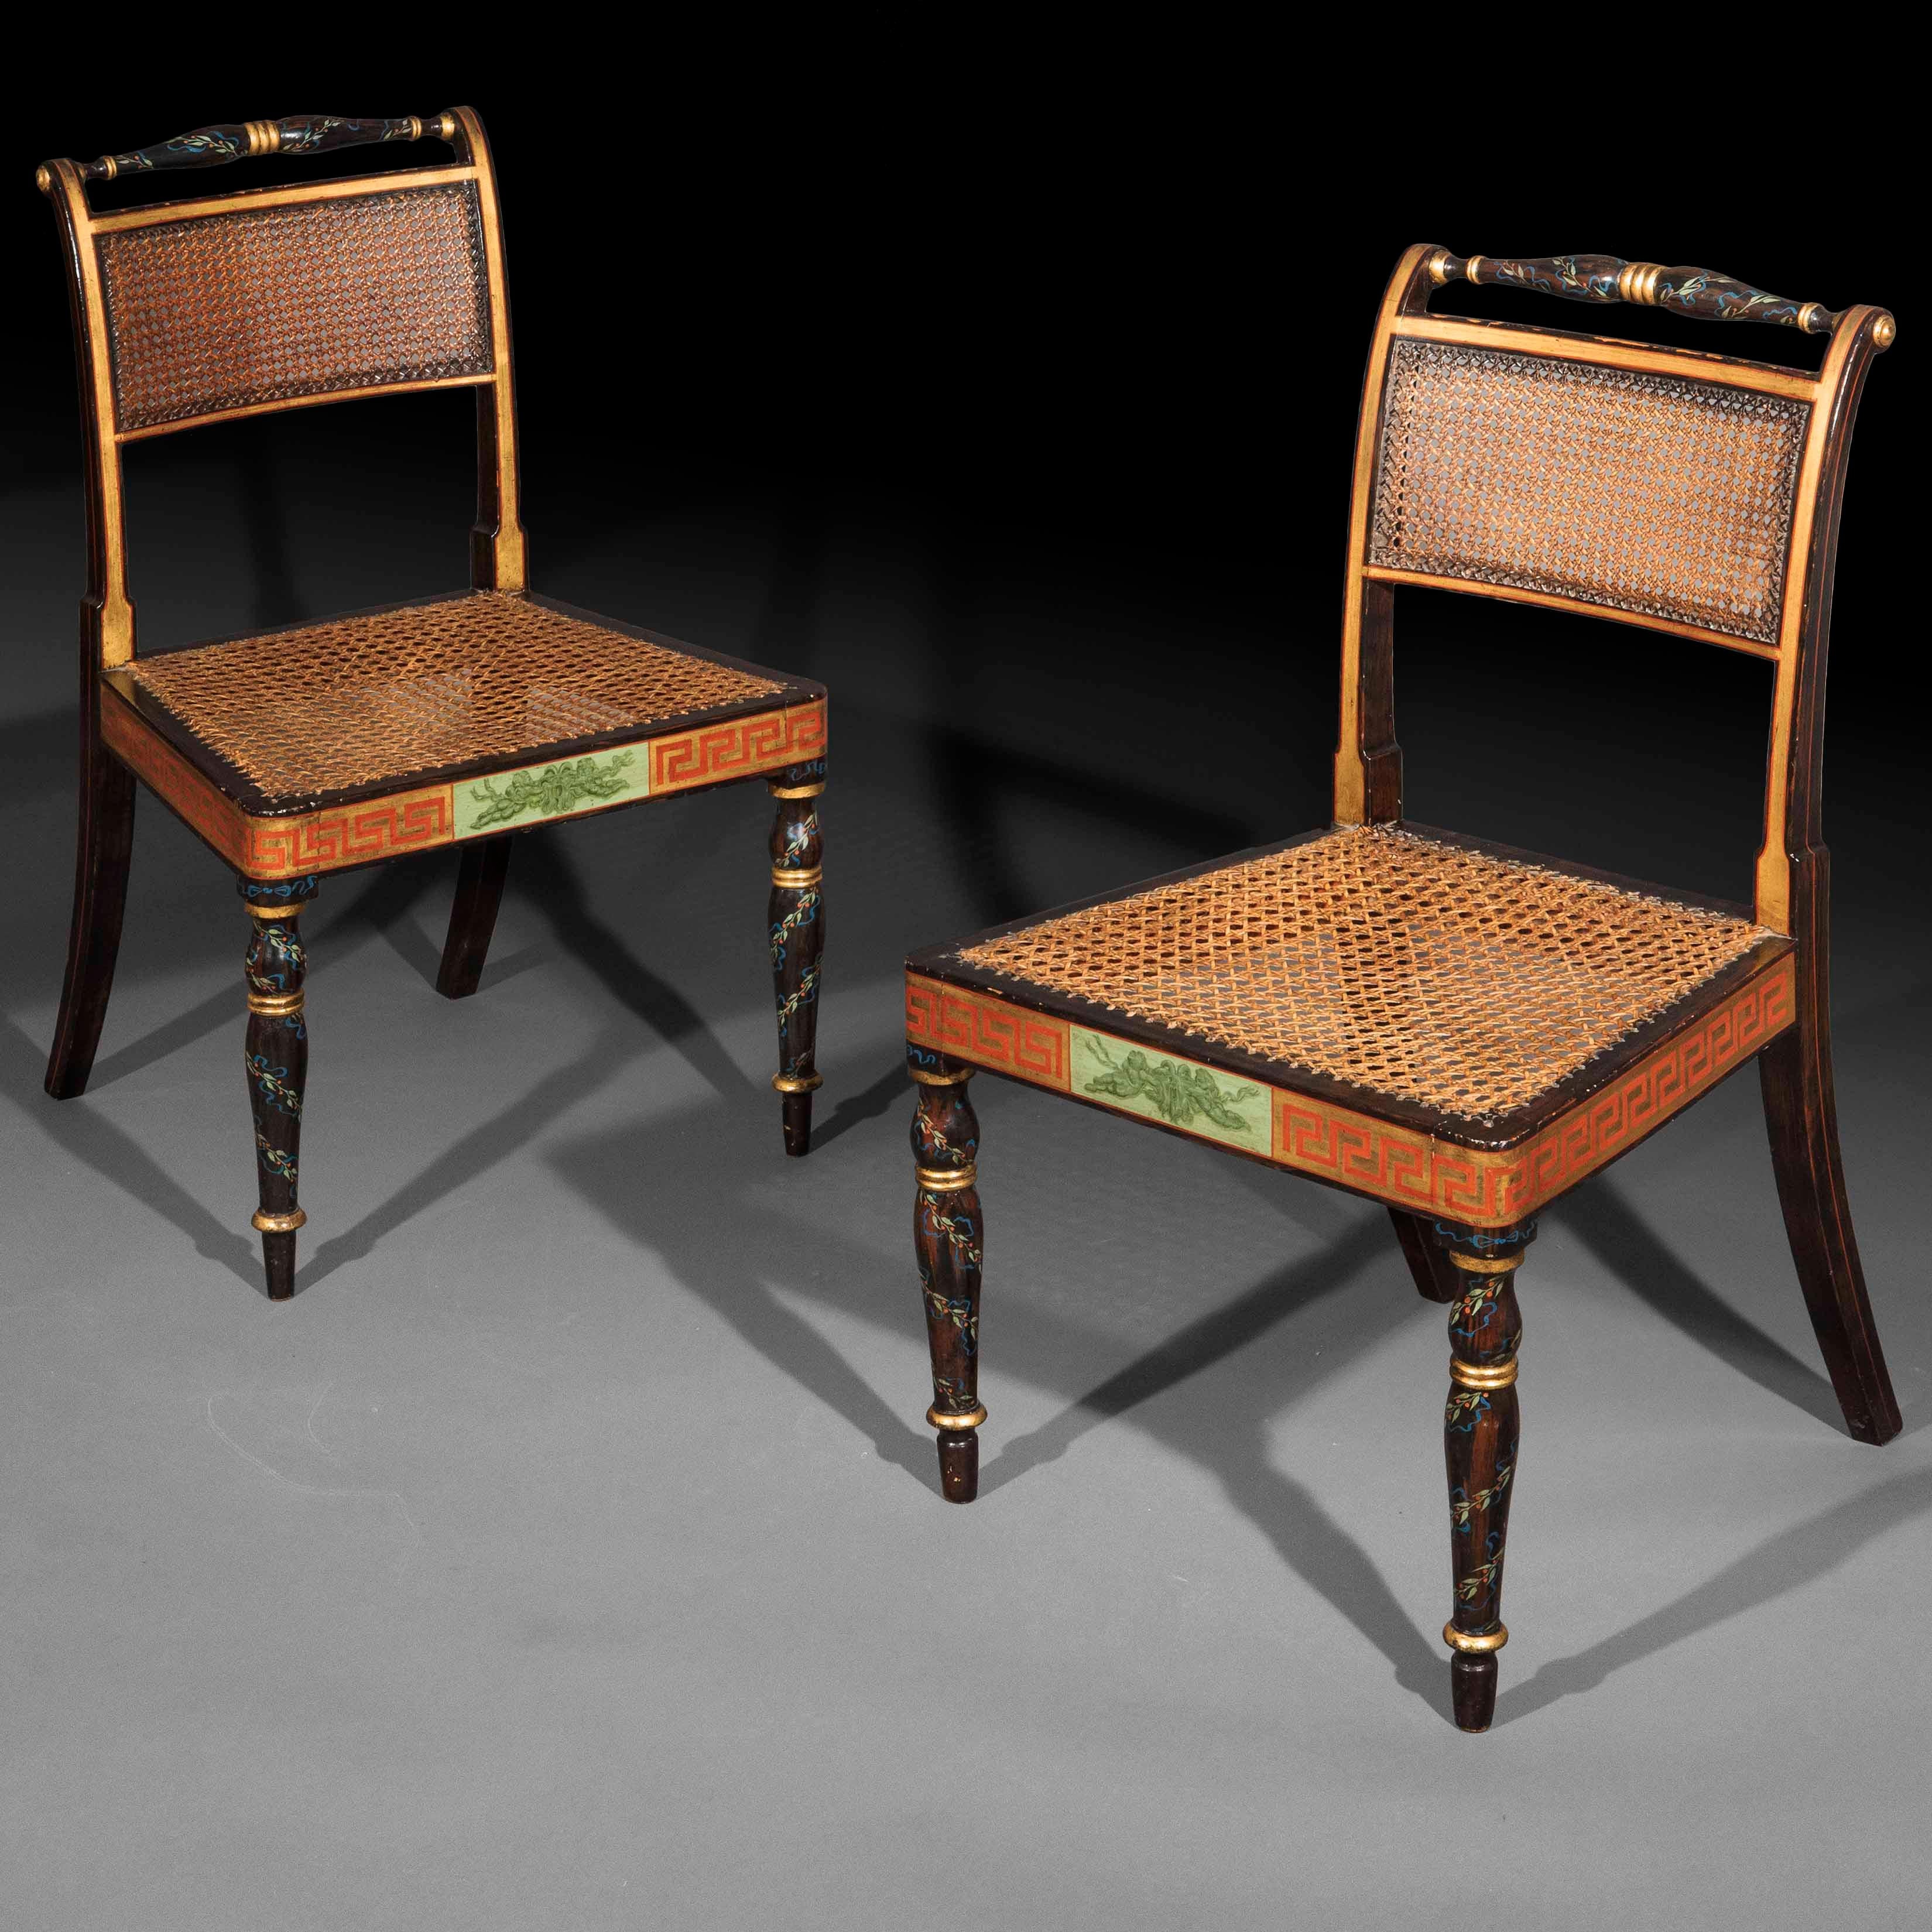 English Georgian Regency Painted Chairs, 3 Pairs Available For Sale